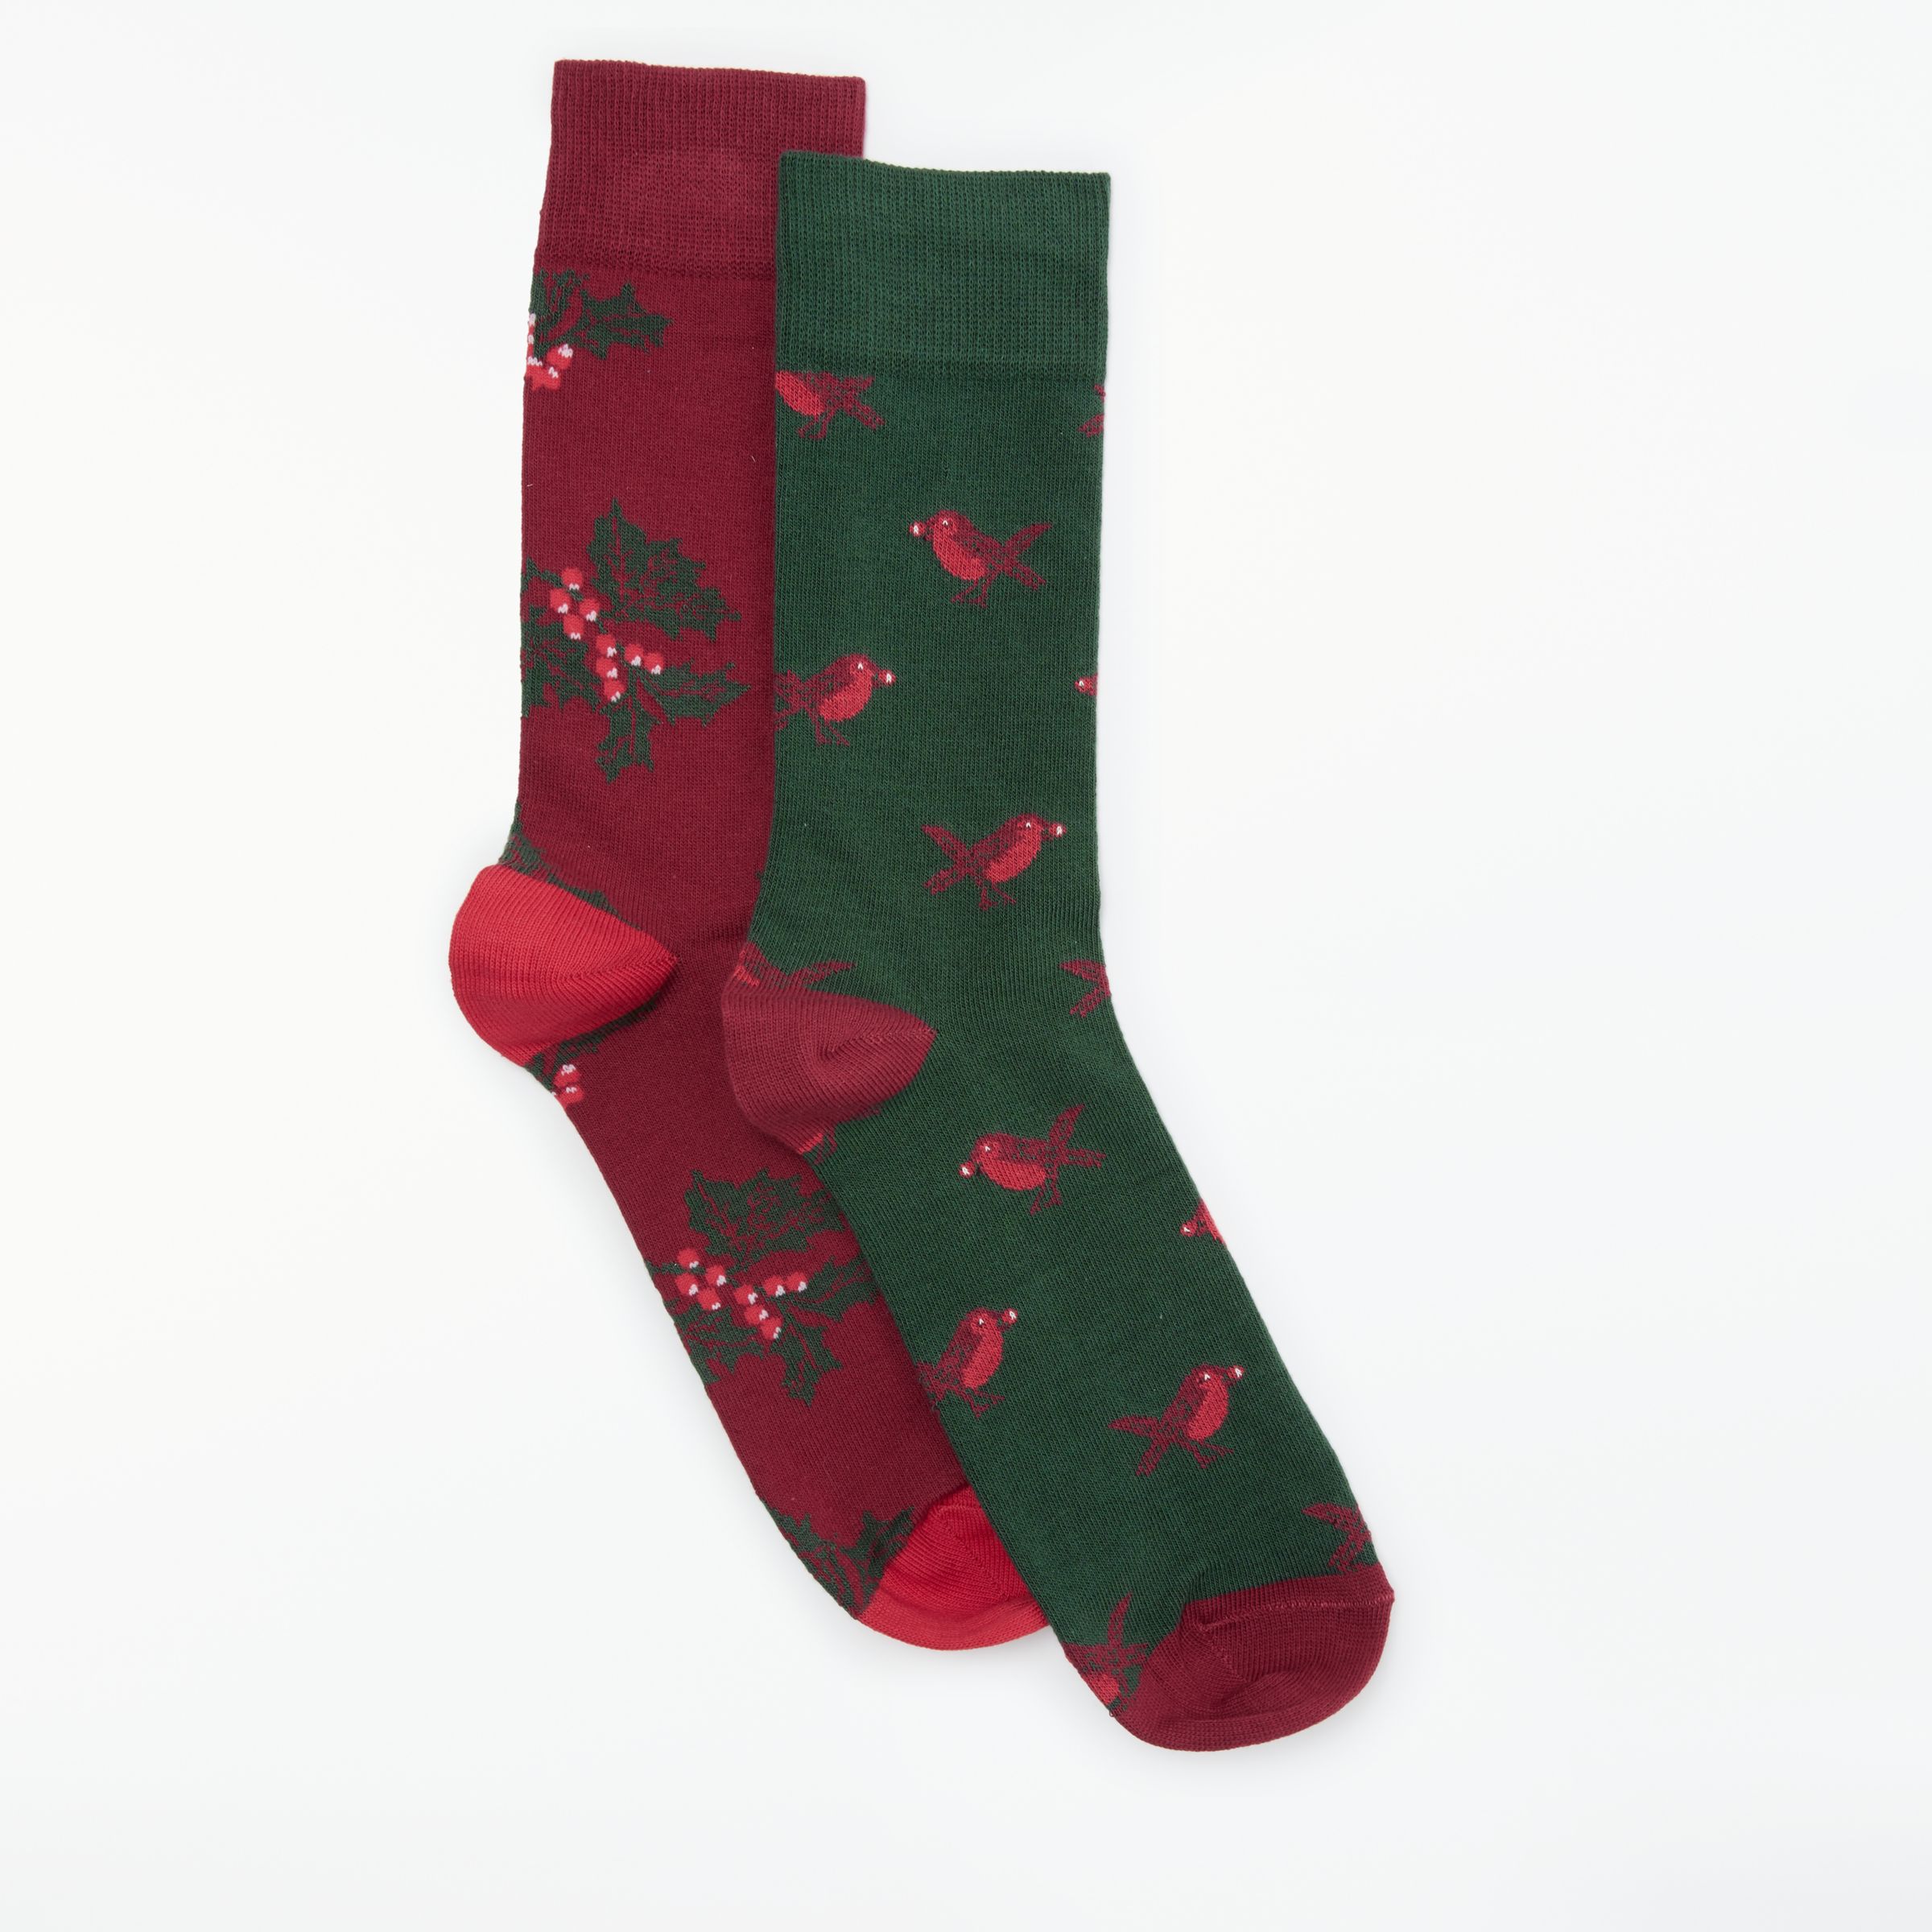 John Lewis 7 Partners Christmas Robin/Holly Socks, One Size, Pack of 2, Red/Green